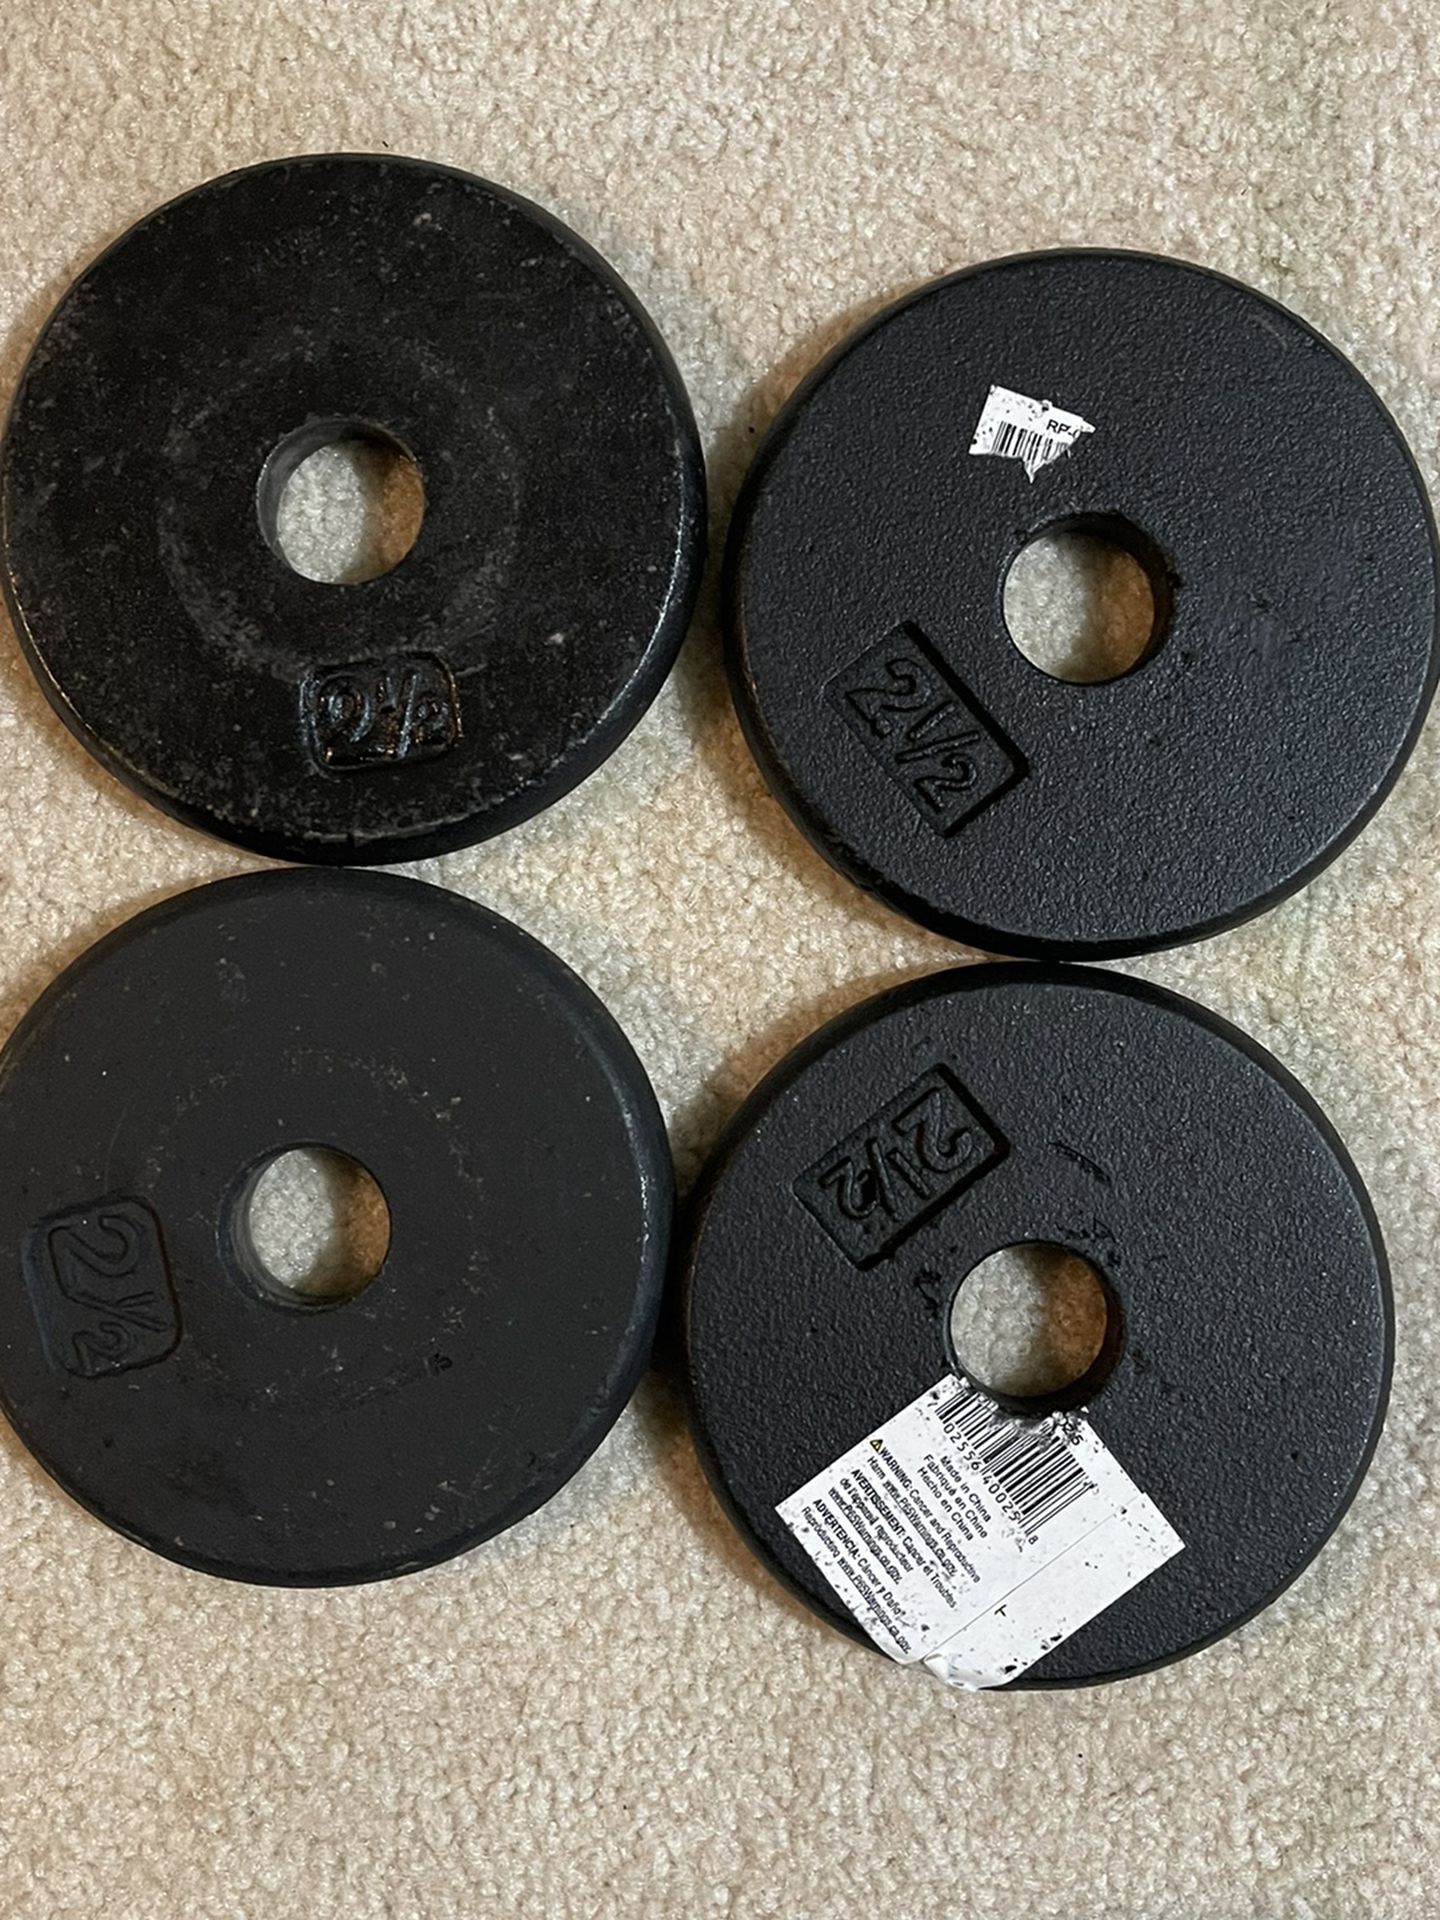 2.5lb Weight Plates